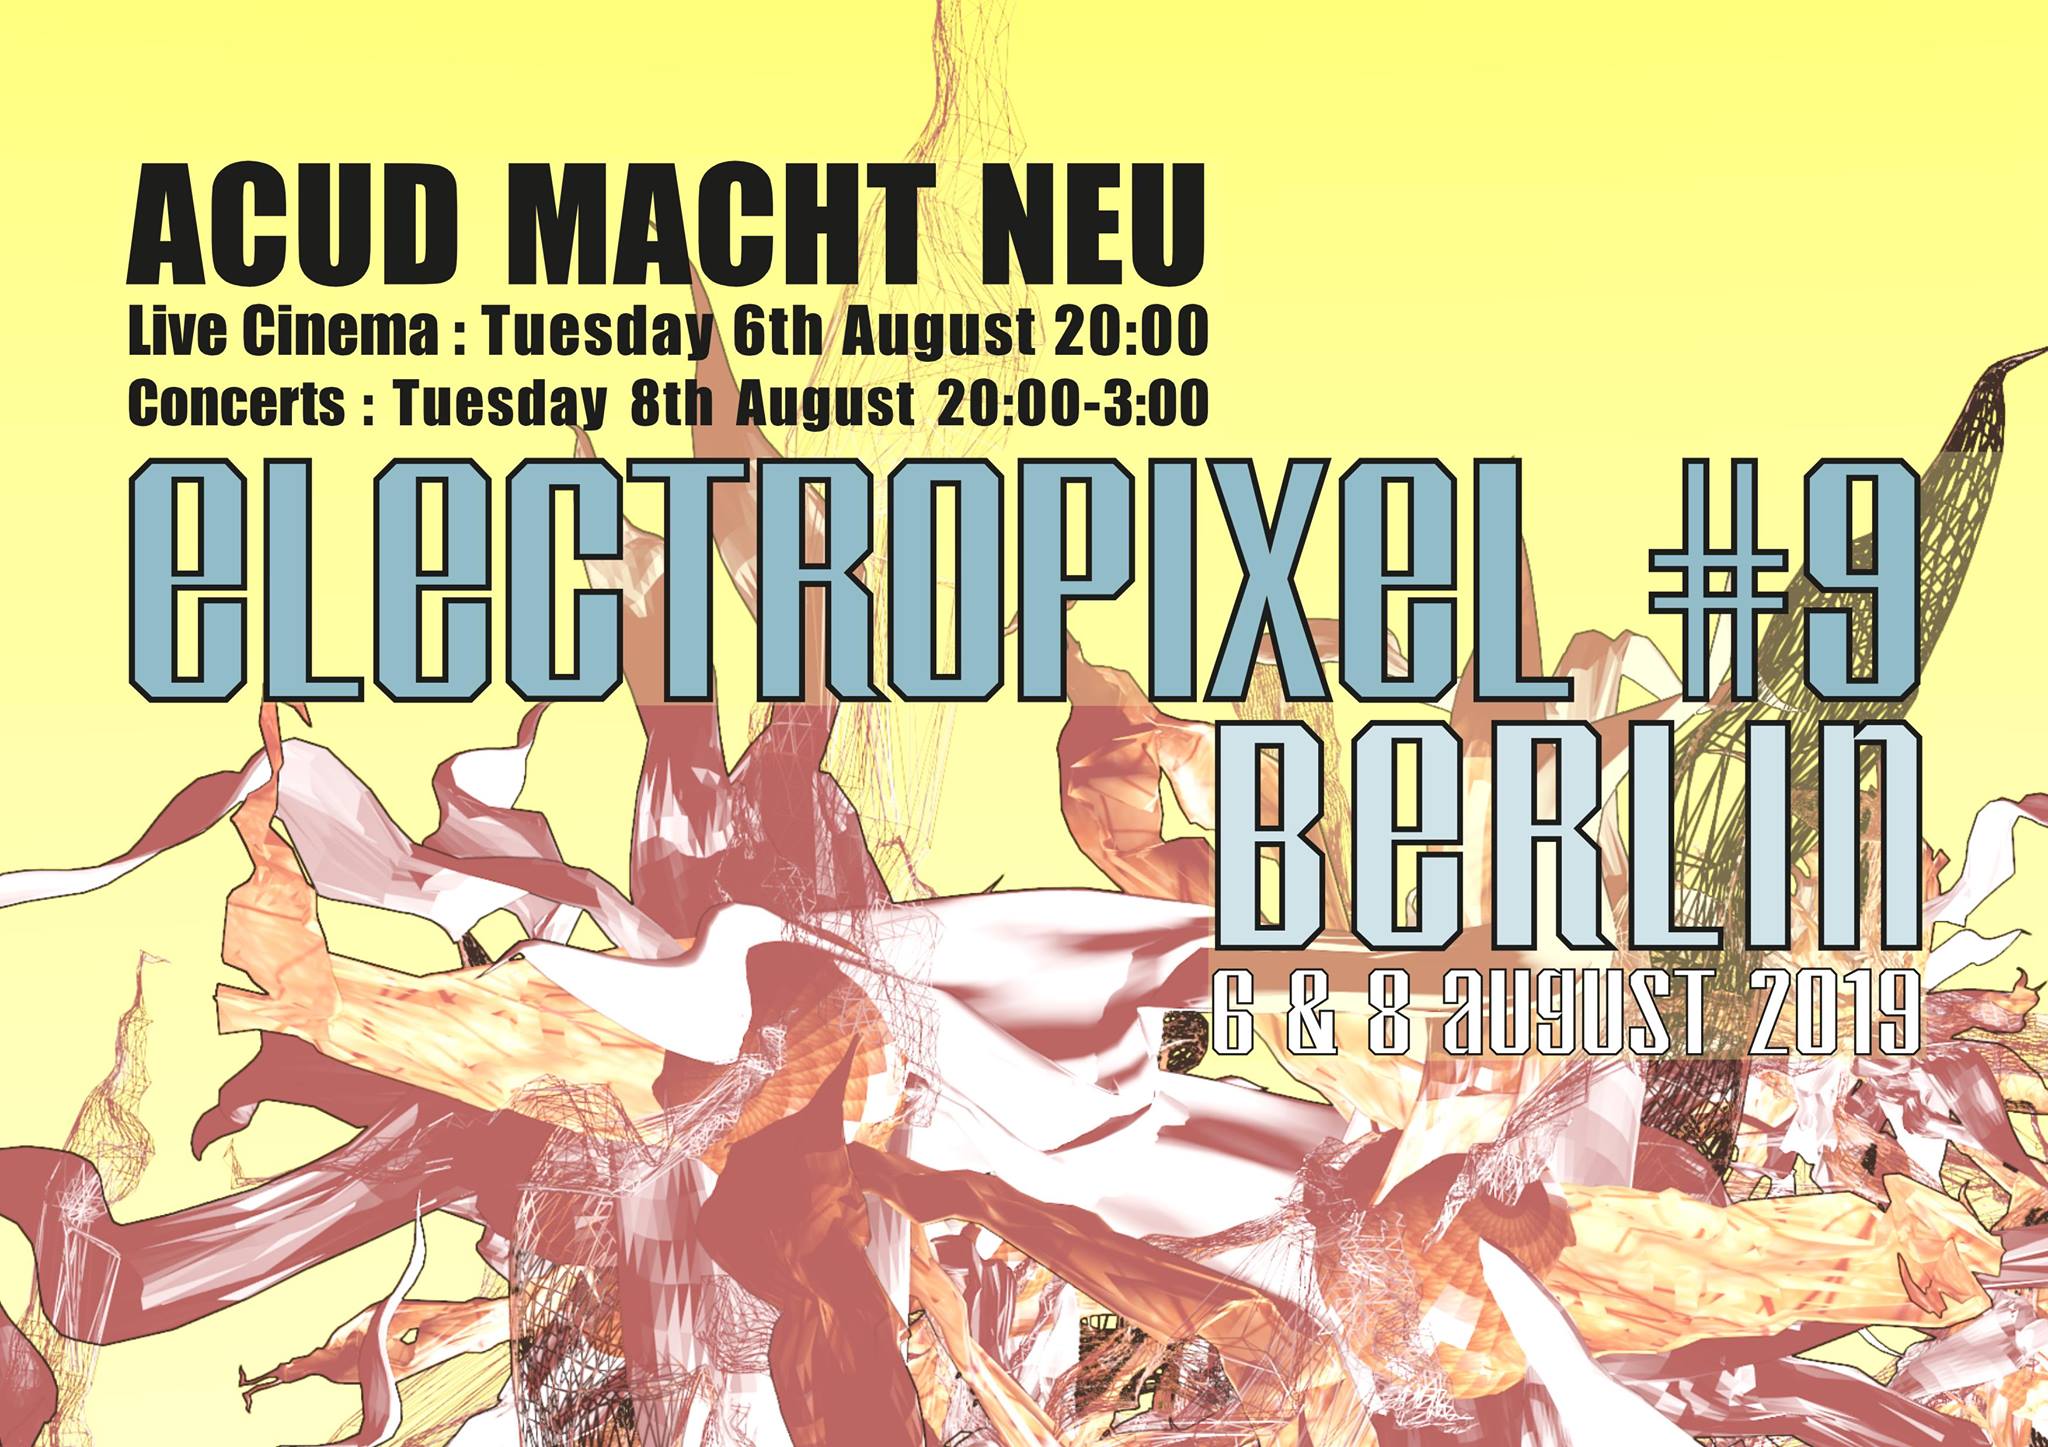 Electropixel #9 – the 6th at the 8th August : Berlin